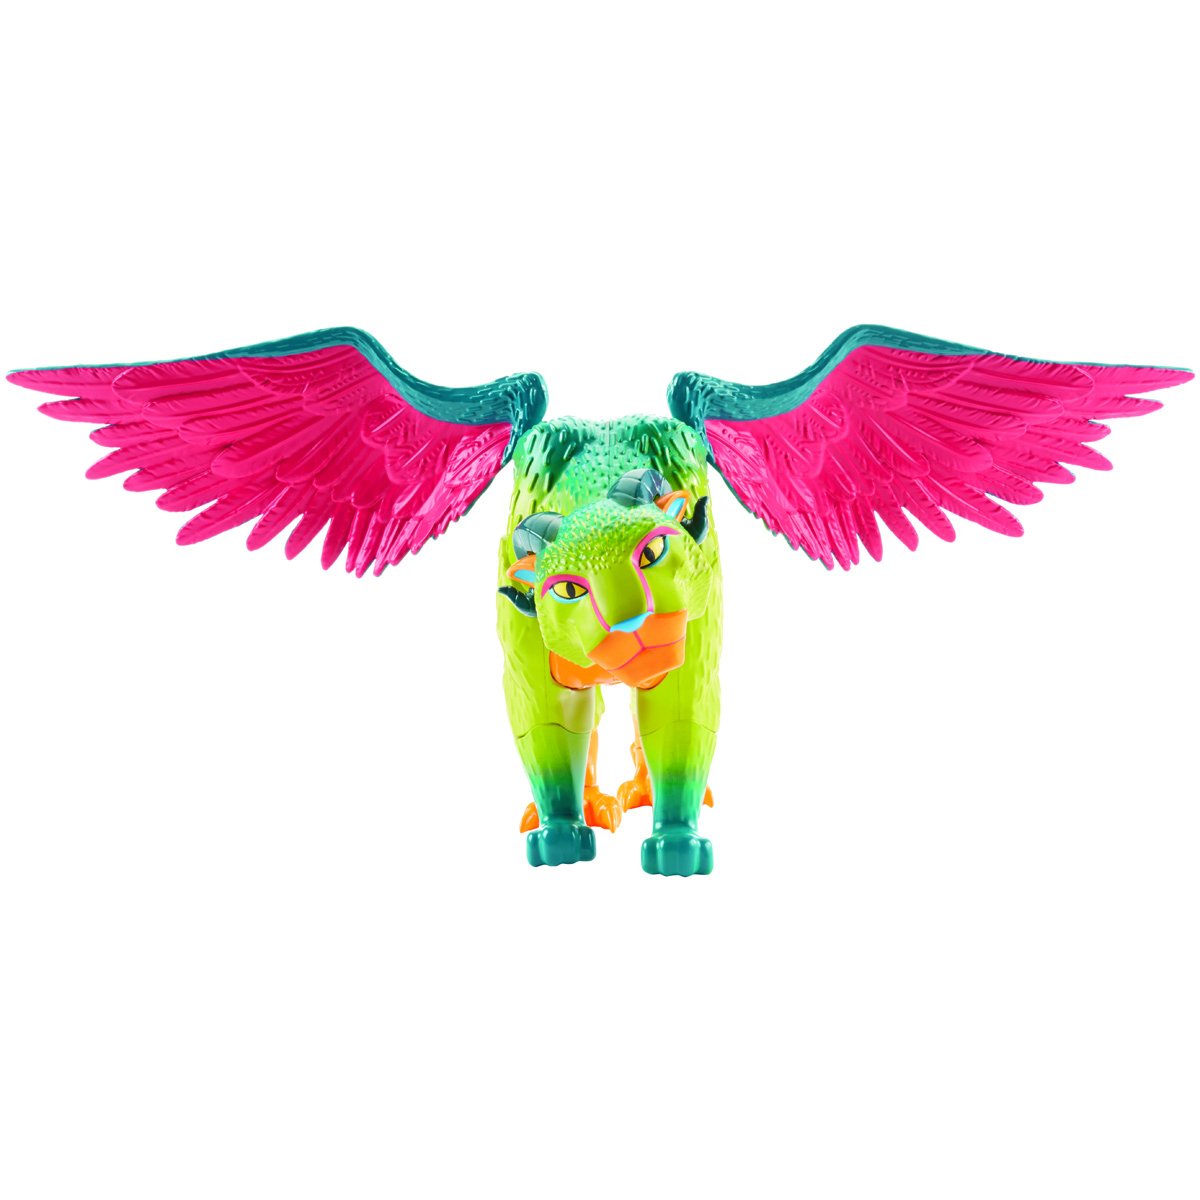 Is it just me that wants a glow in the dark pop of pepita (from coco). 